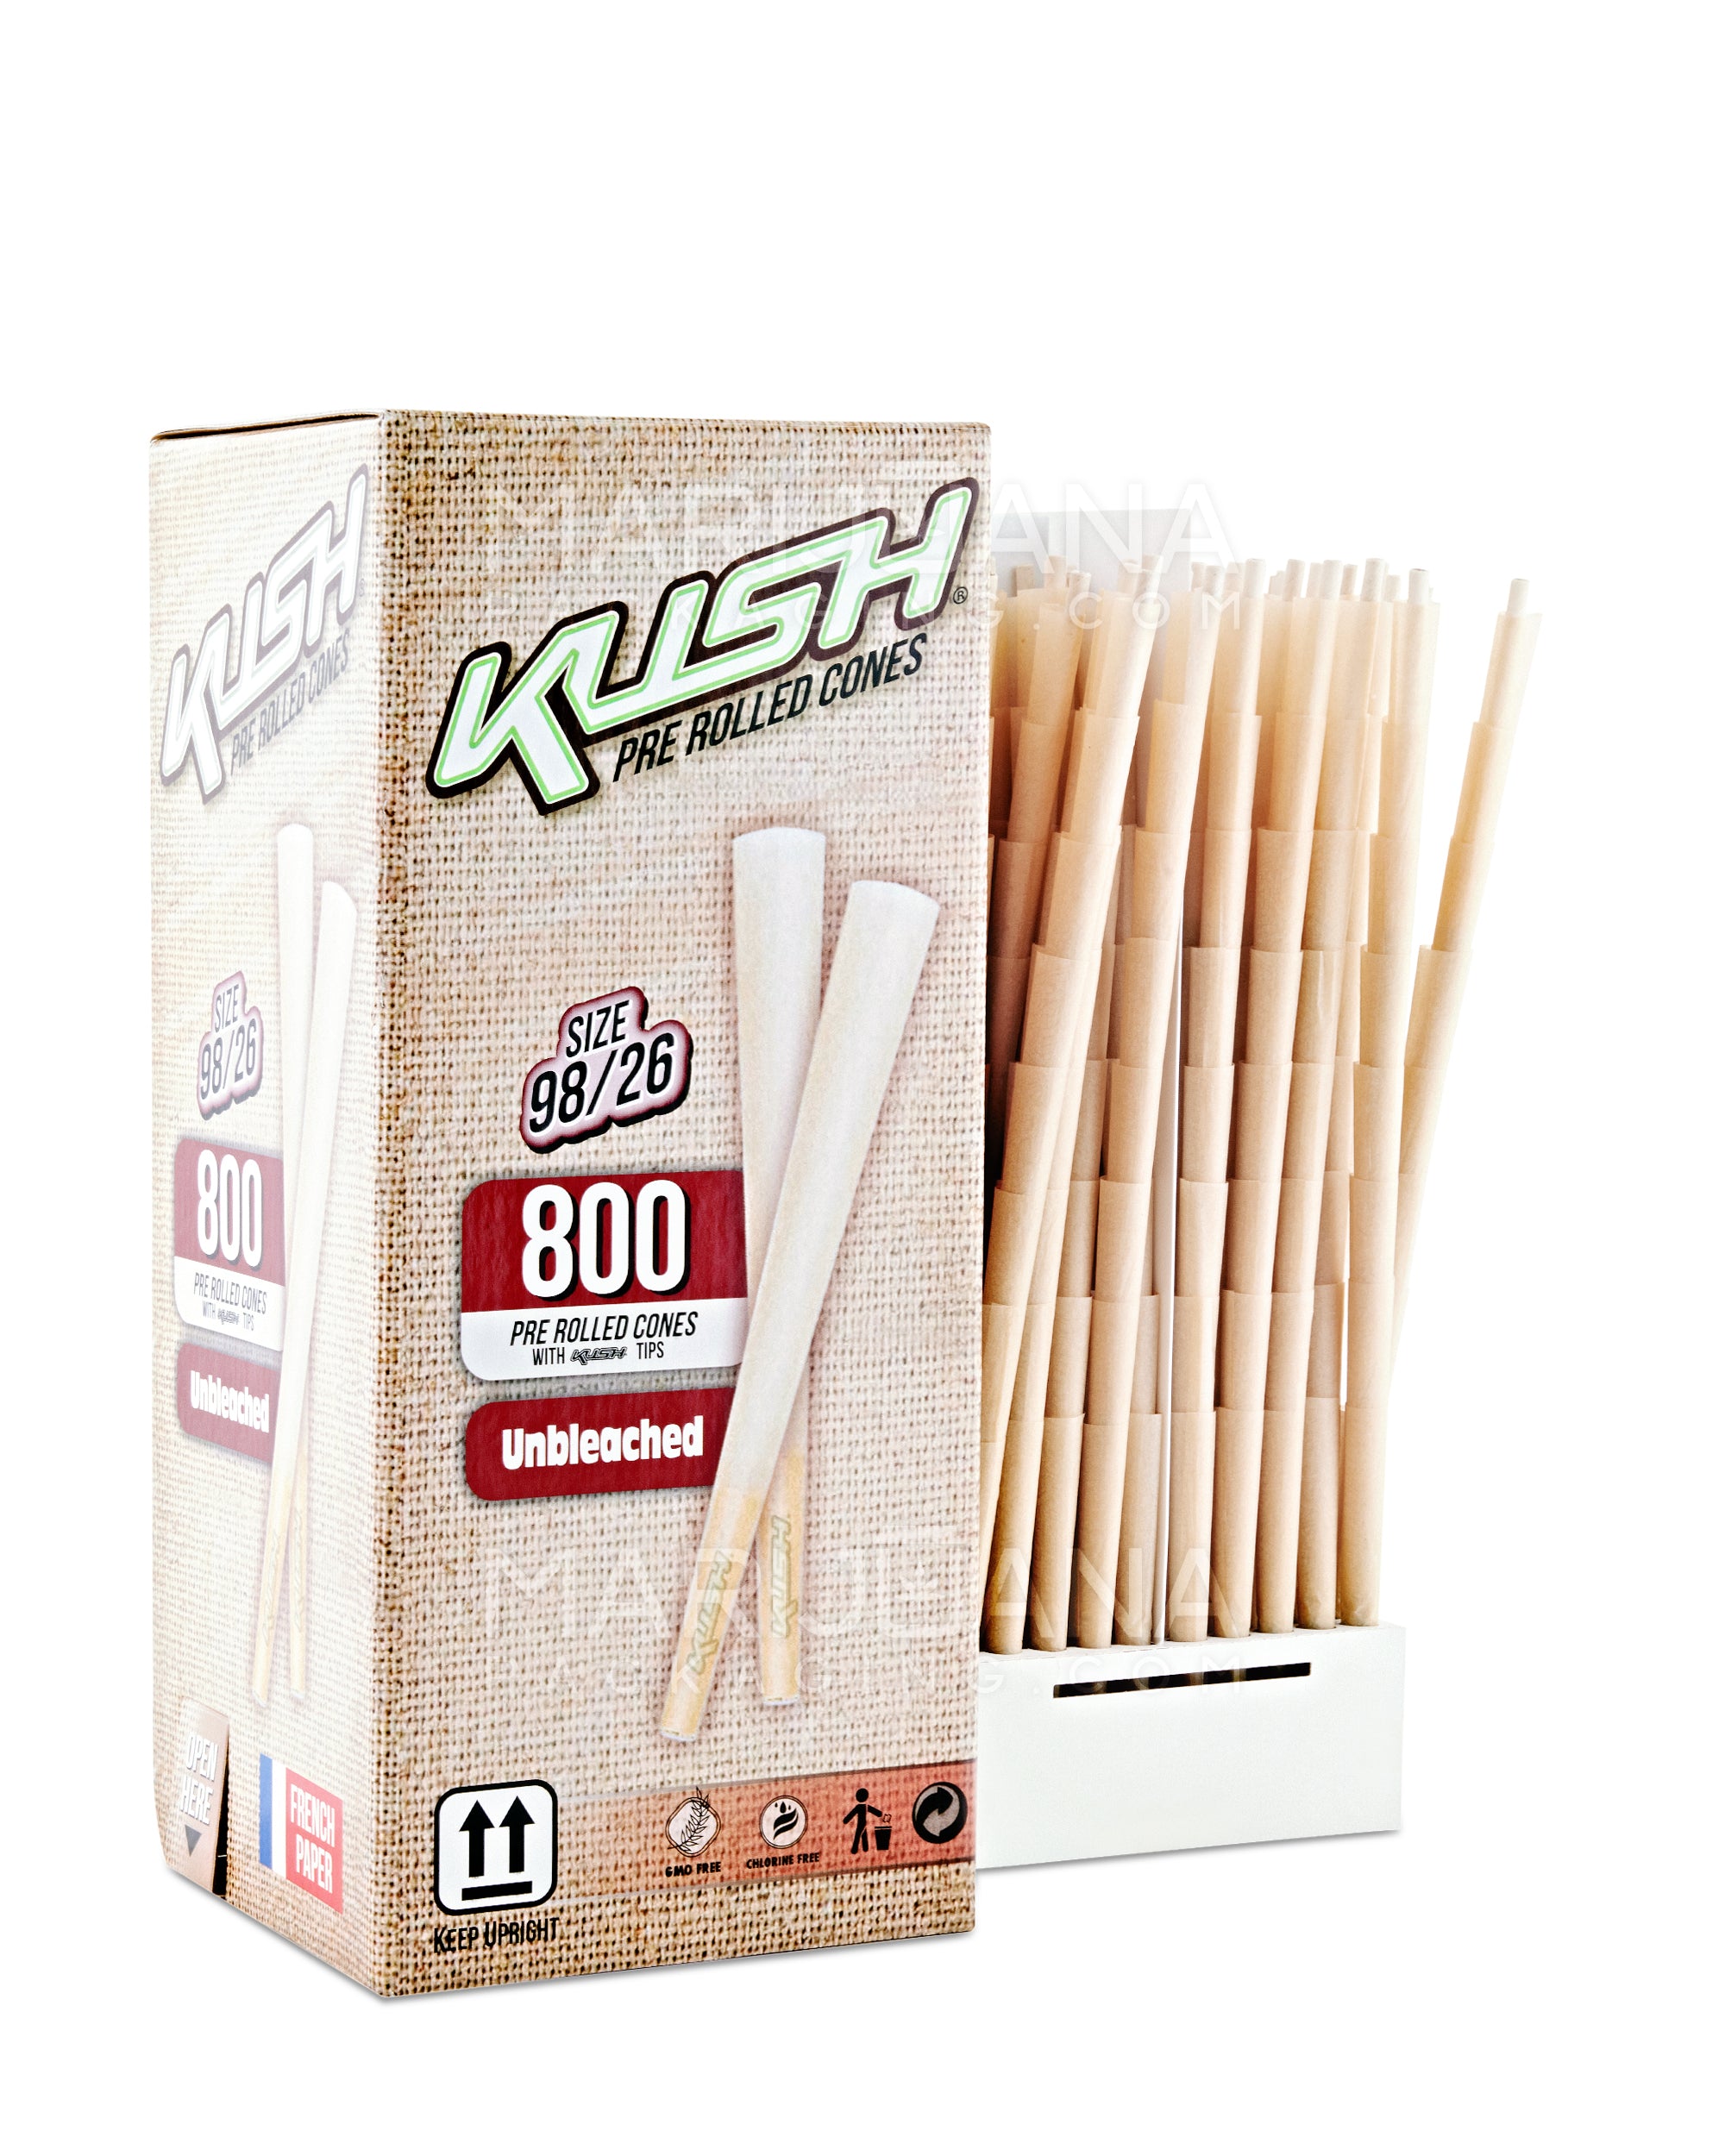 KUSH | Unbleached 98 Special Size Pre-Rolled Cones w/ Filter Tip | 98mm - Brown Paper - 800 Count - 2